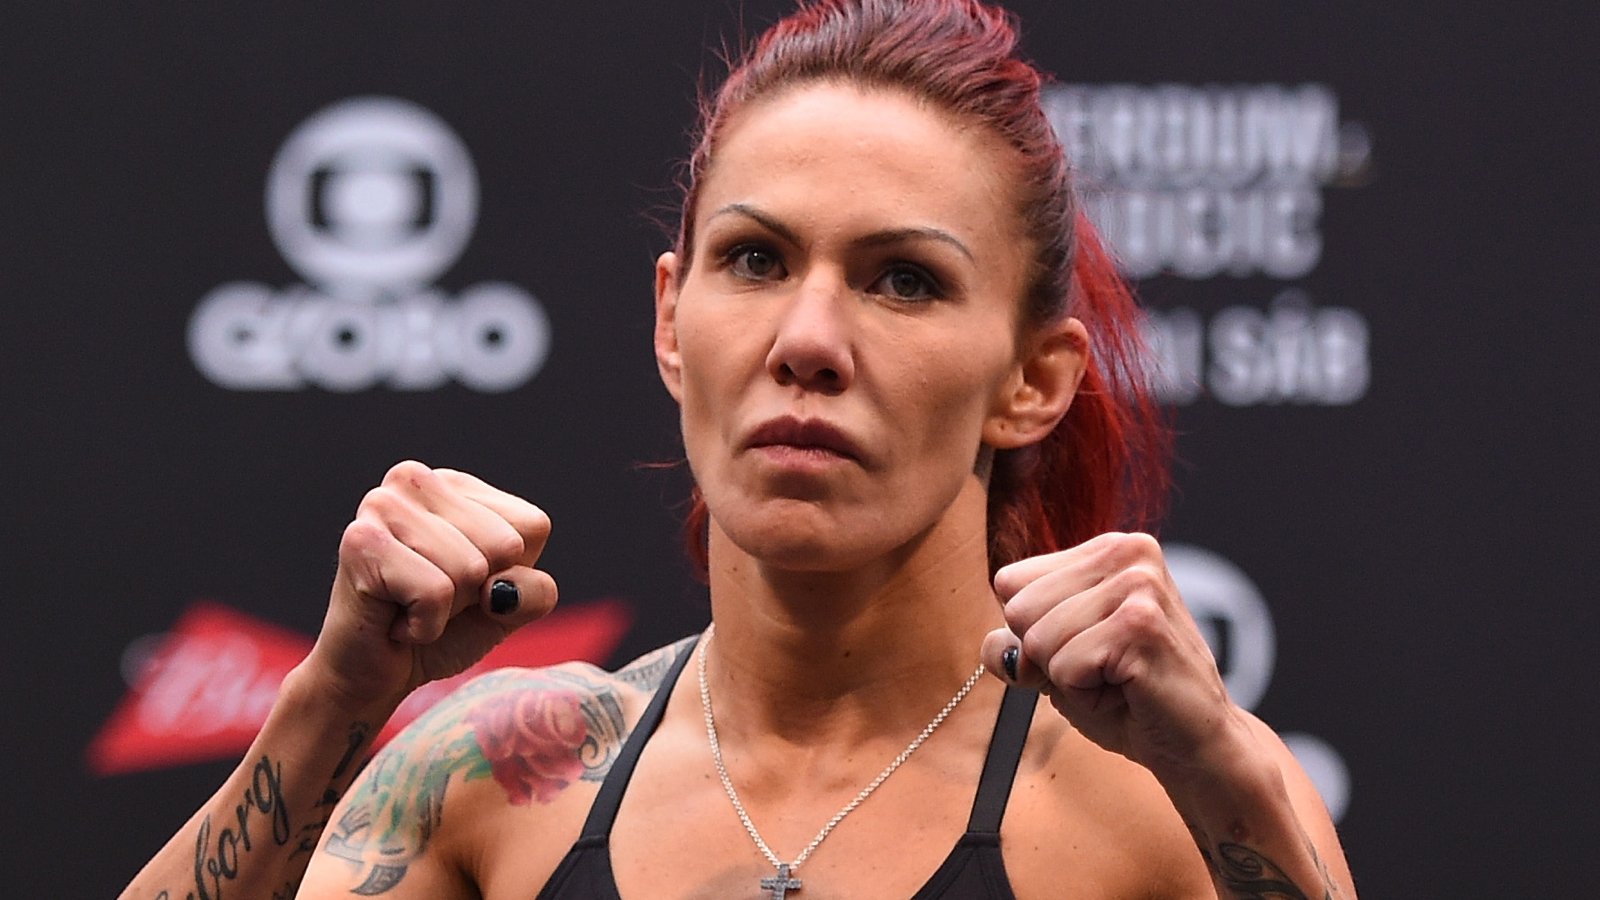 “Cris "Cyborg" brought to tears during brutal weight cut ...